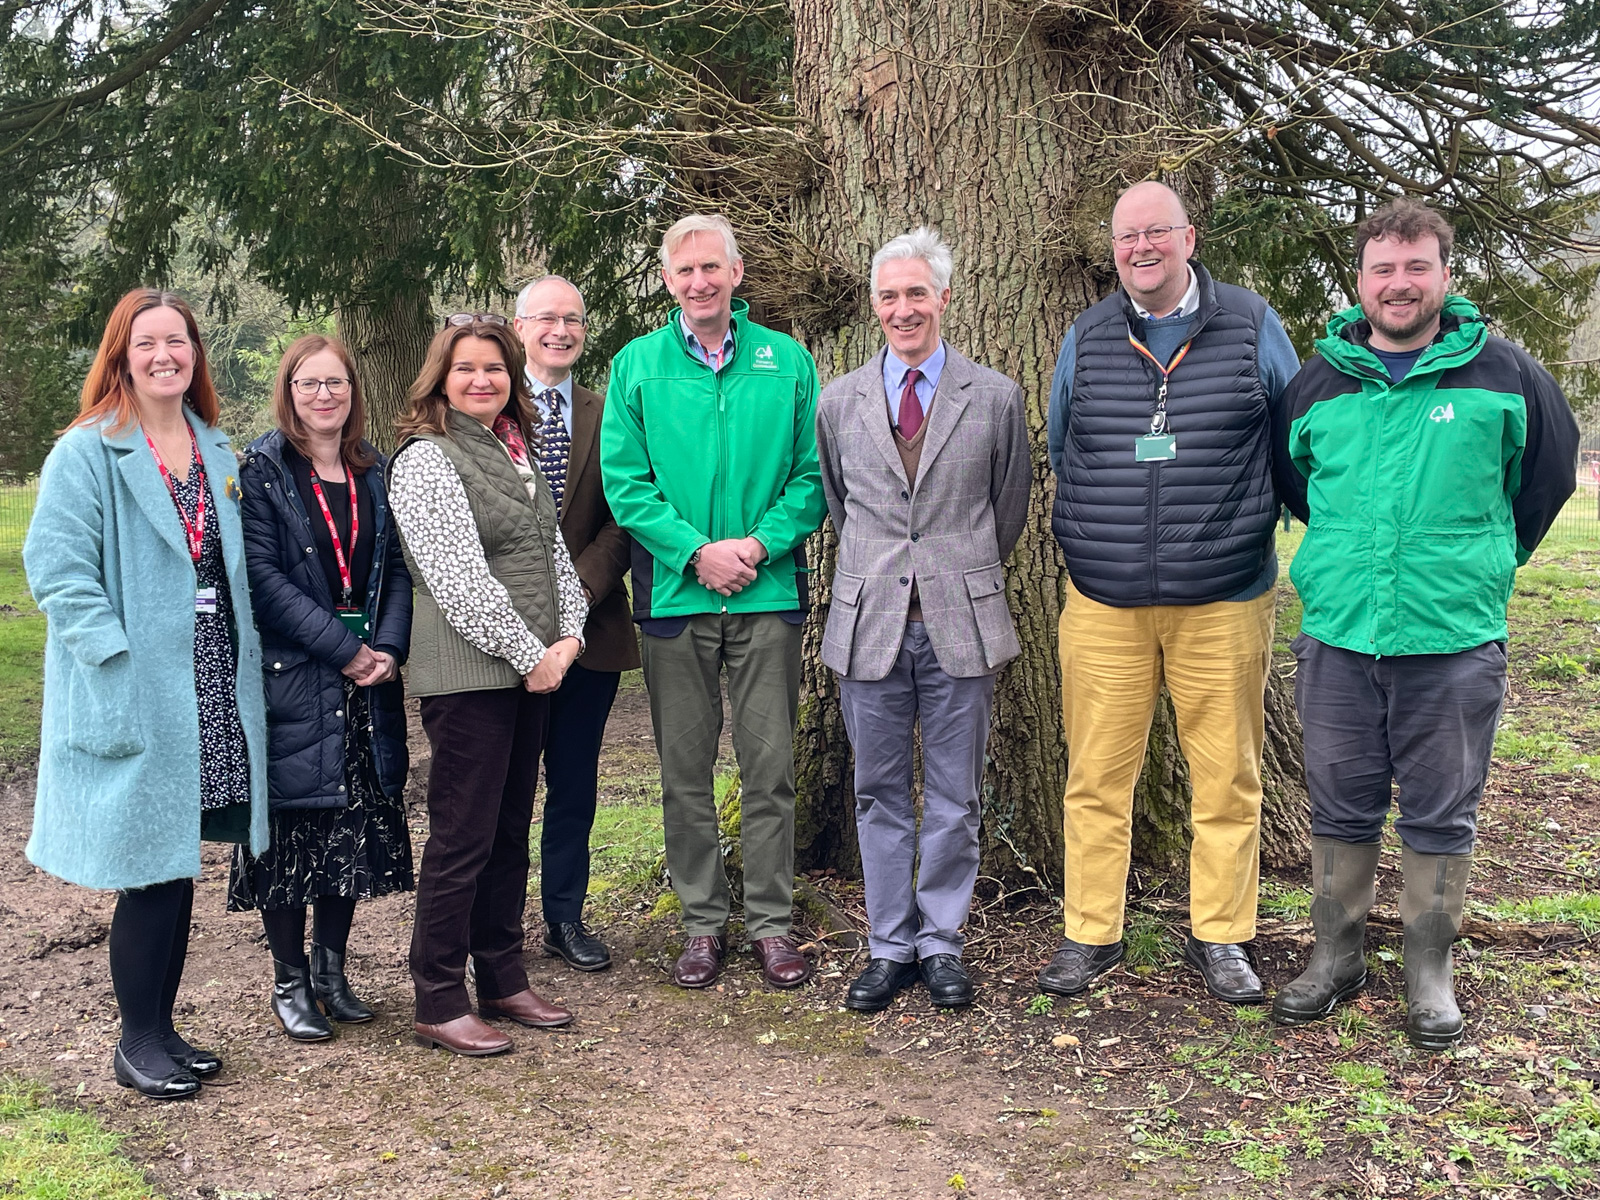 Lord Douglas-Miller OBE, Parliamentary Under-Secretary of State at Defra and Minister for Biosecurity, Animal Health and Welfare meets staff from Forest Research, as they gather for a photo at Alice Holt Research Station.